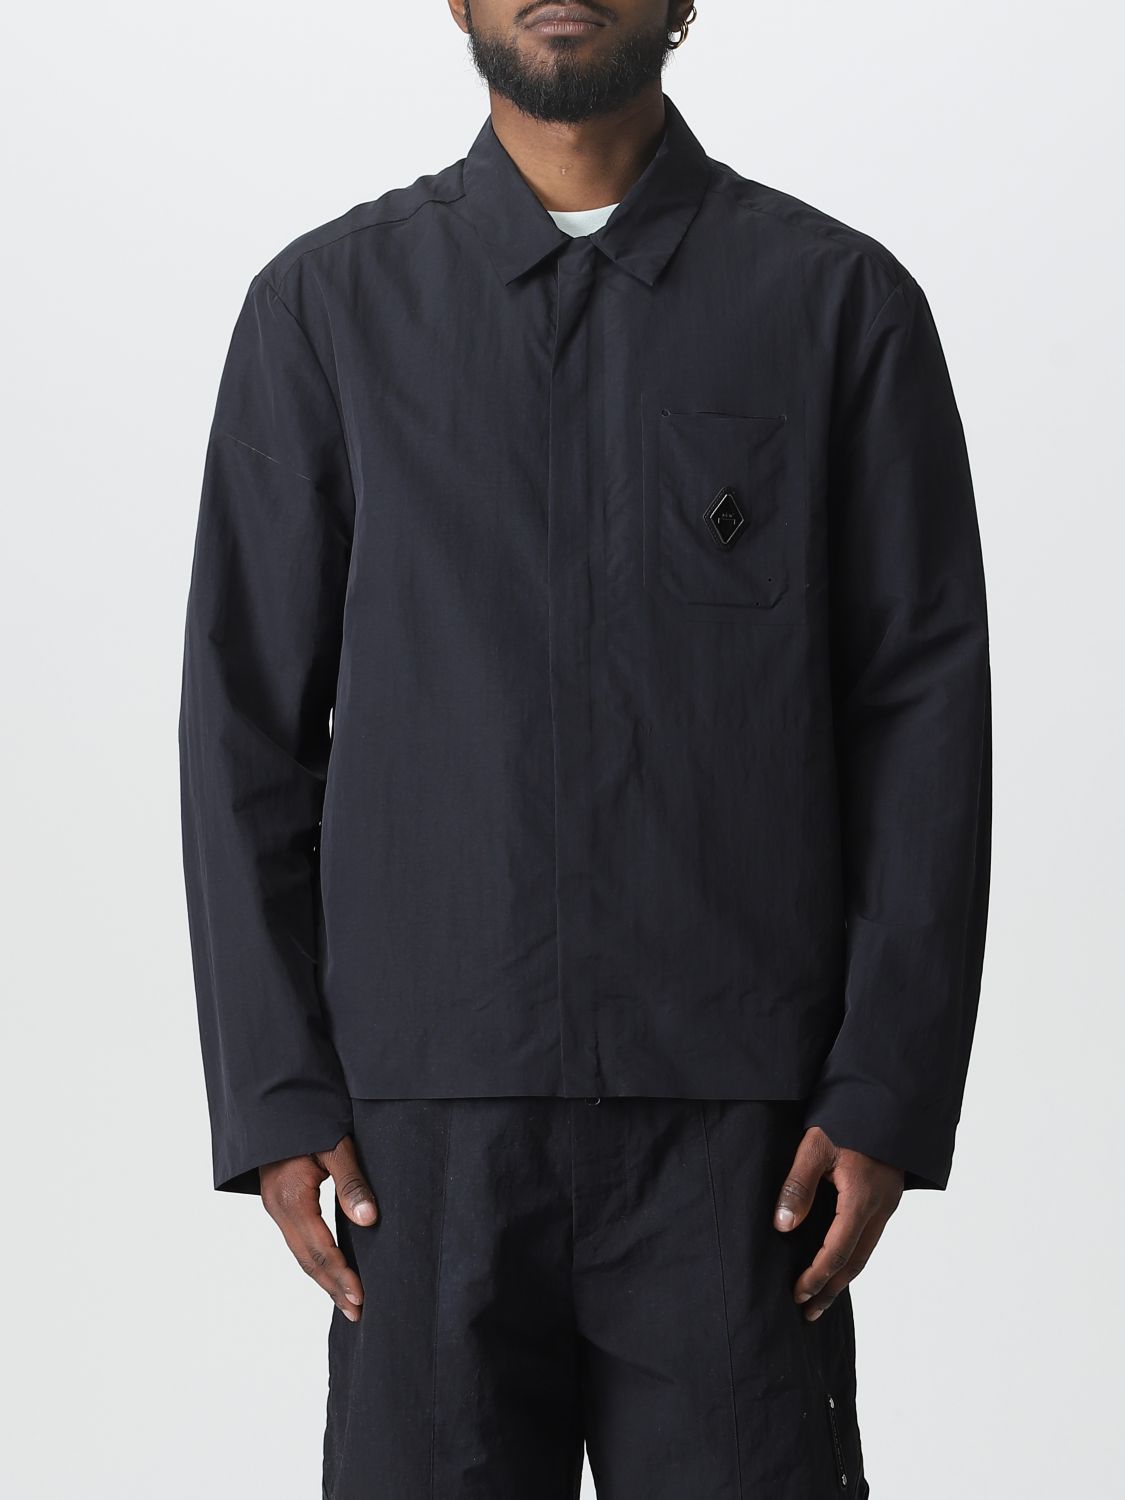 A-COLD-WALL*: jacket for man - Black | A-Cold-Wall* jacket MSH088 ...